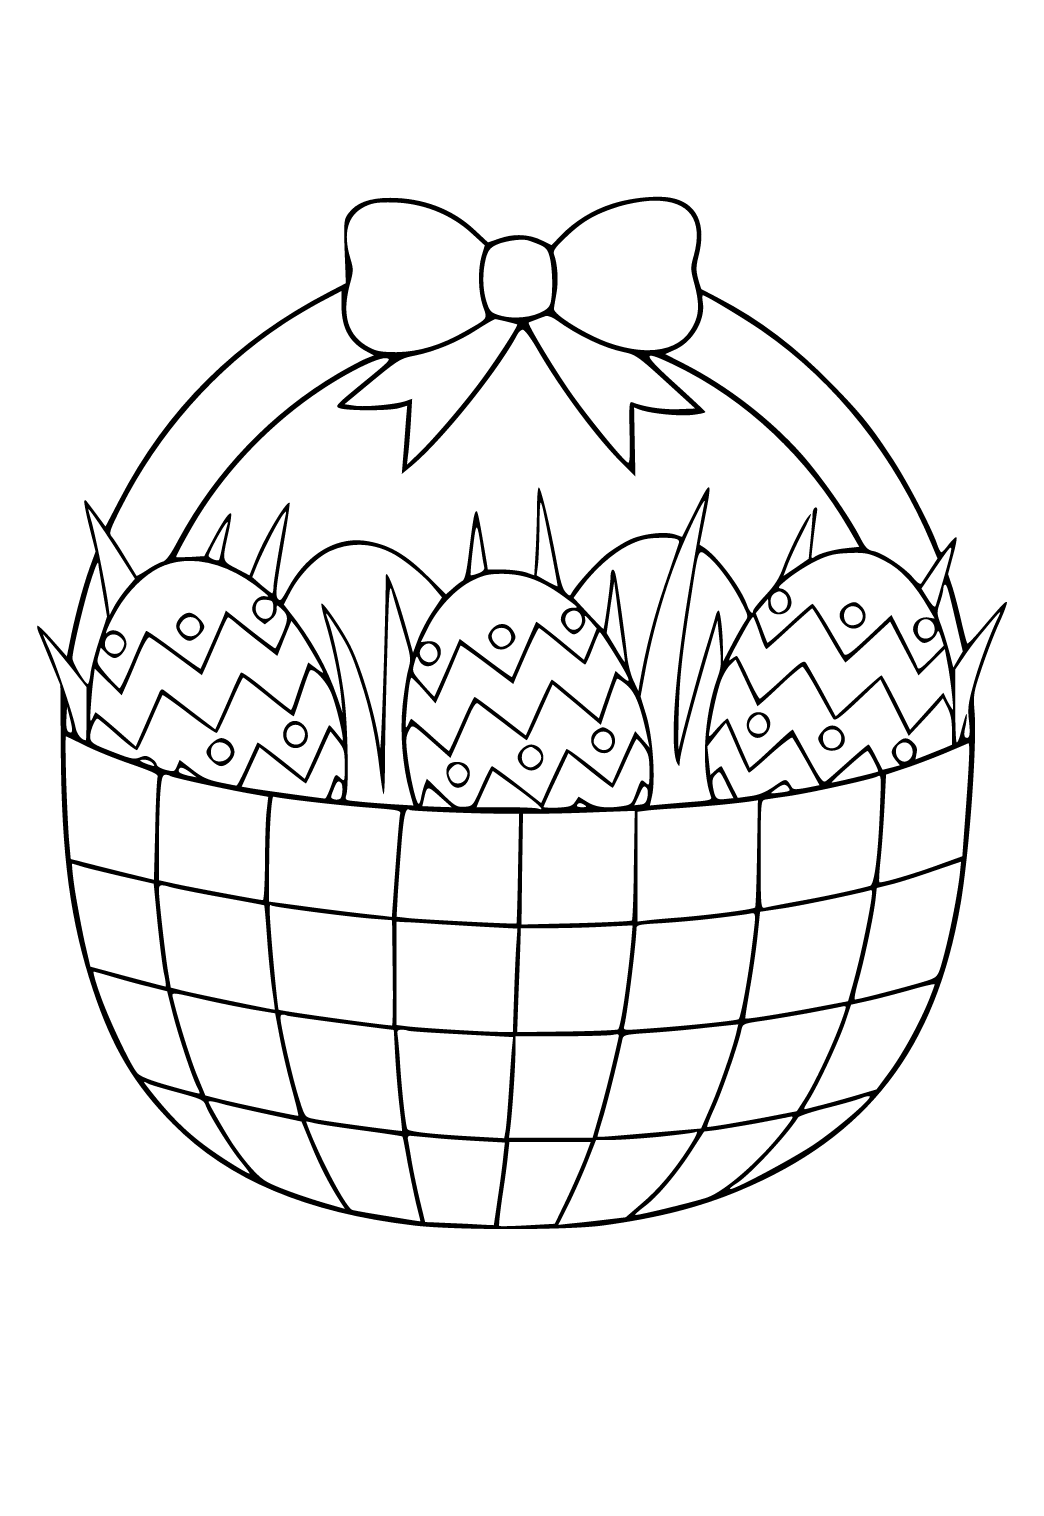 Free printable easter egg basket coloring page for adults and kids